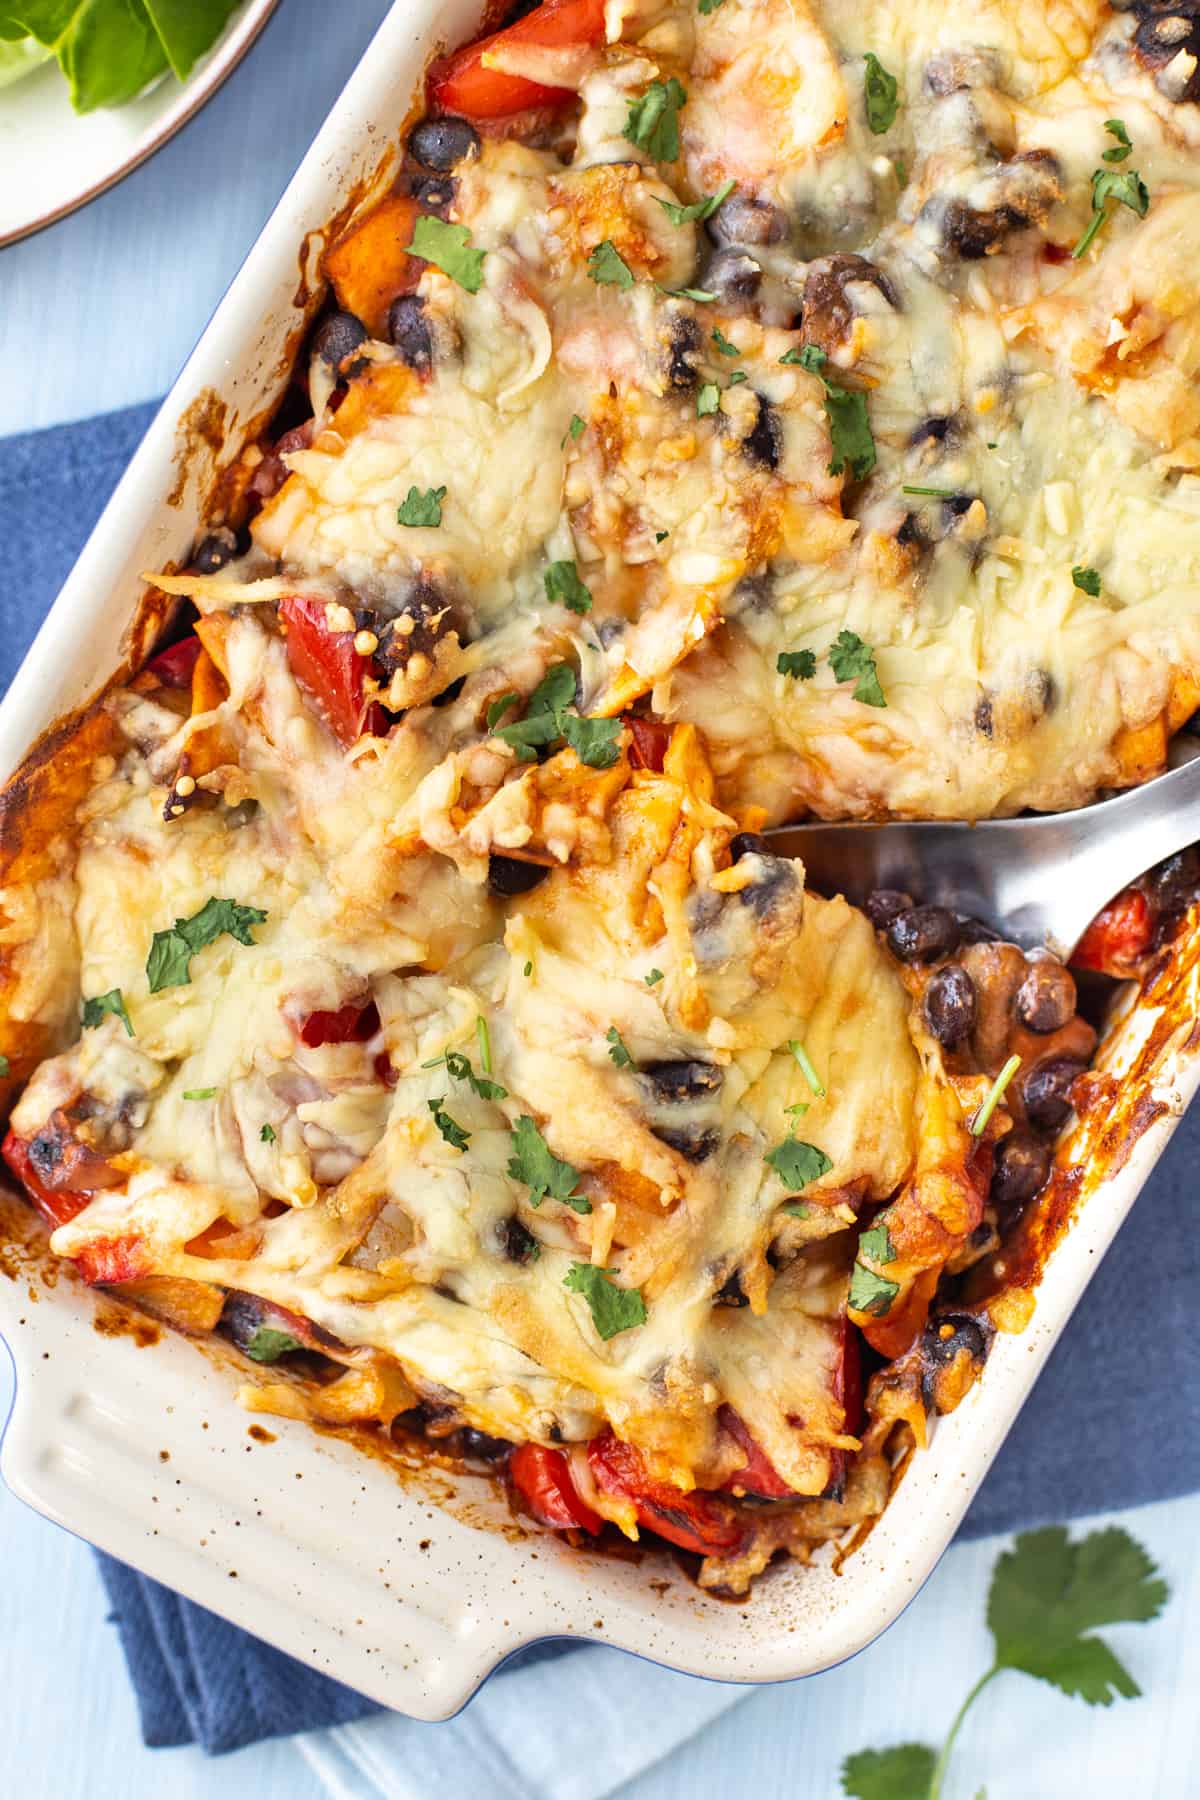 A cheesy enchilada casserole in a baking dish with a spoon.